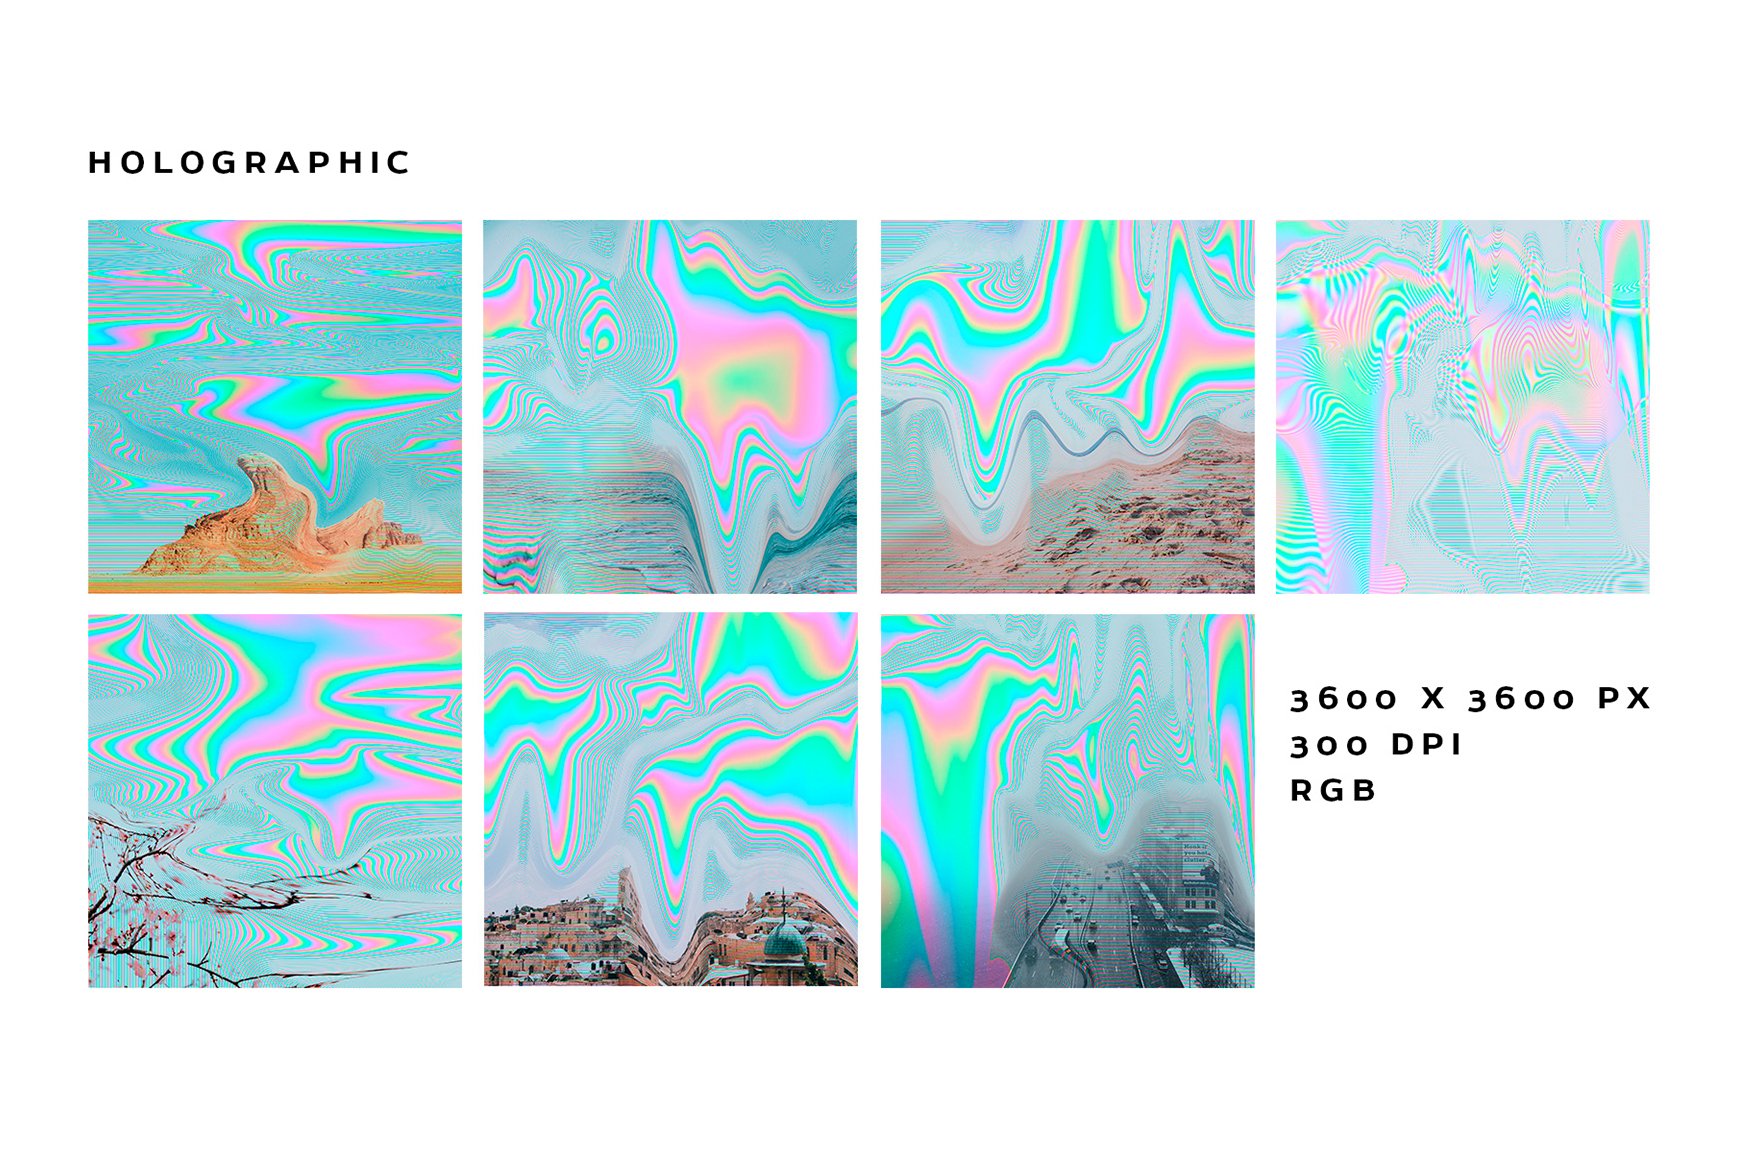 Holographic Glitch Abstract Textures